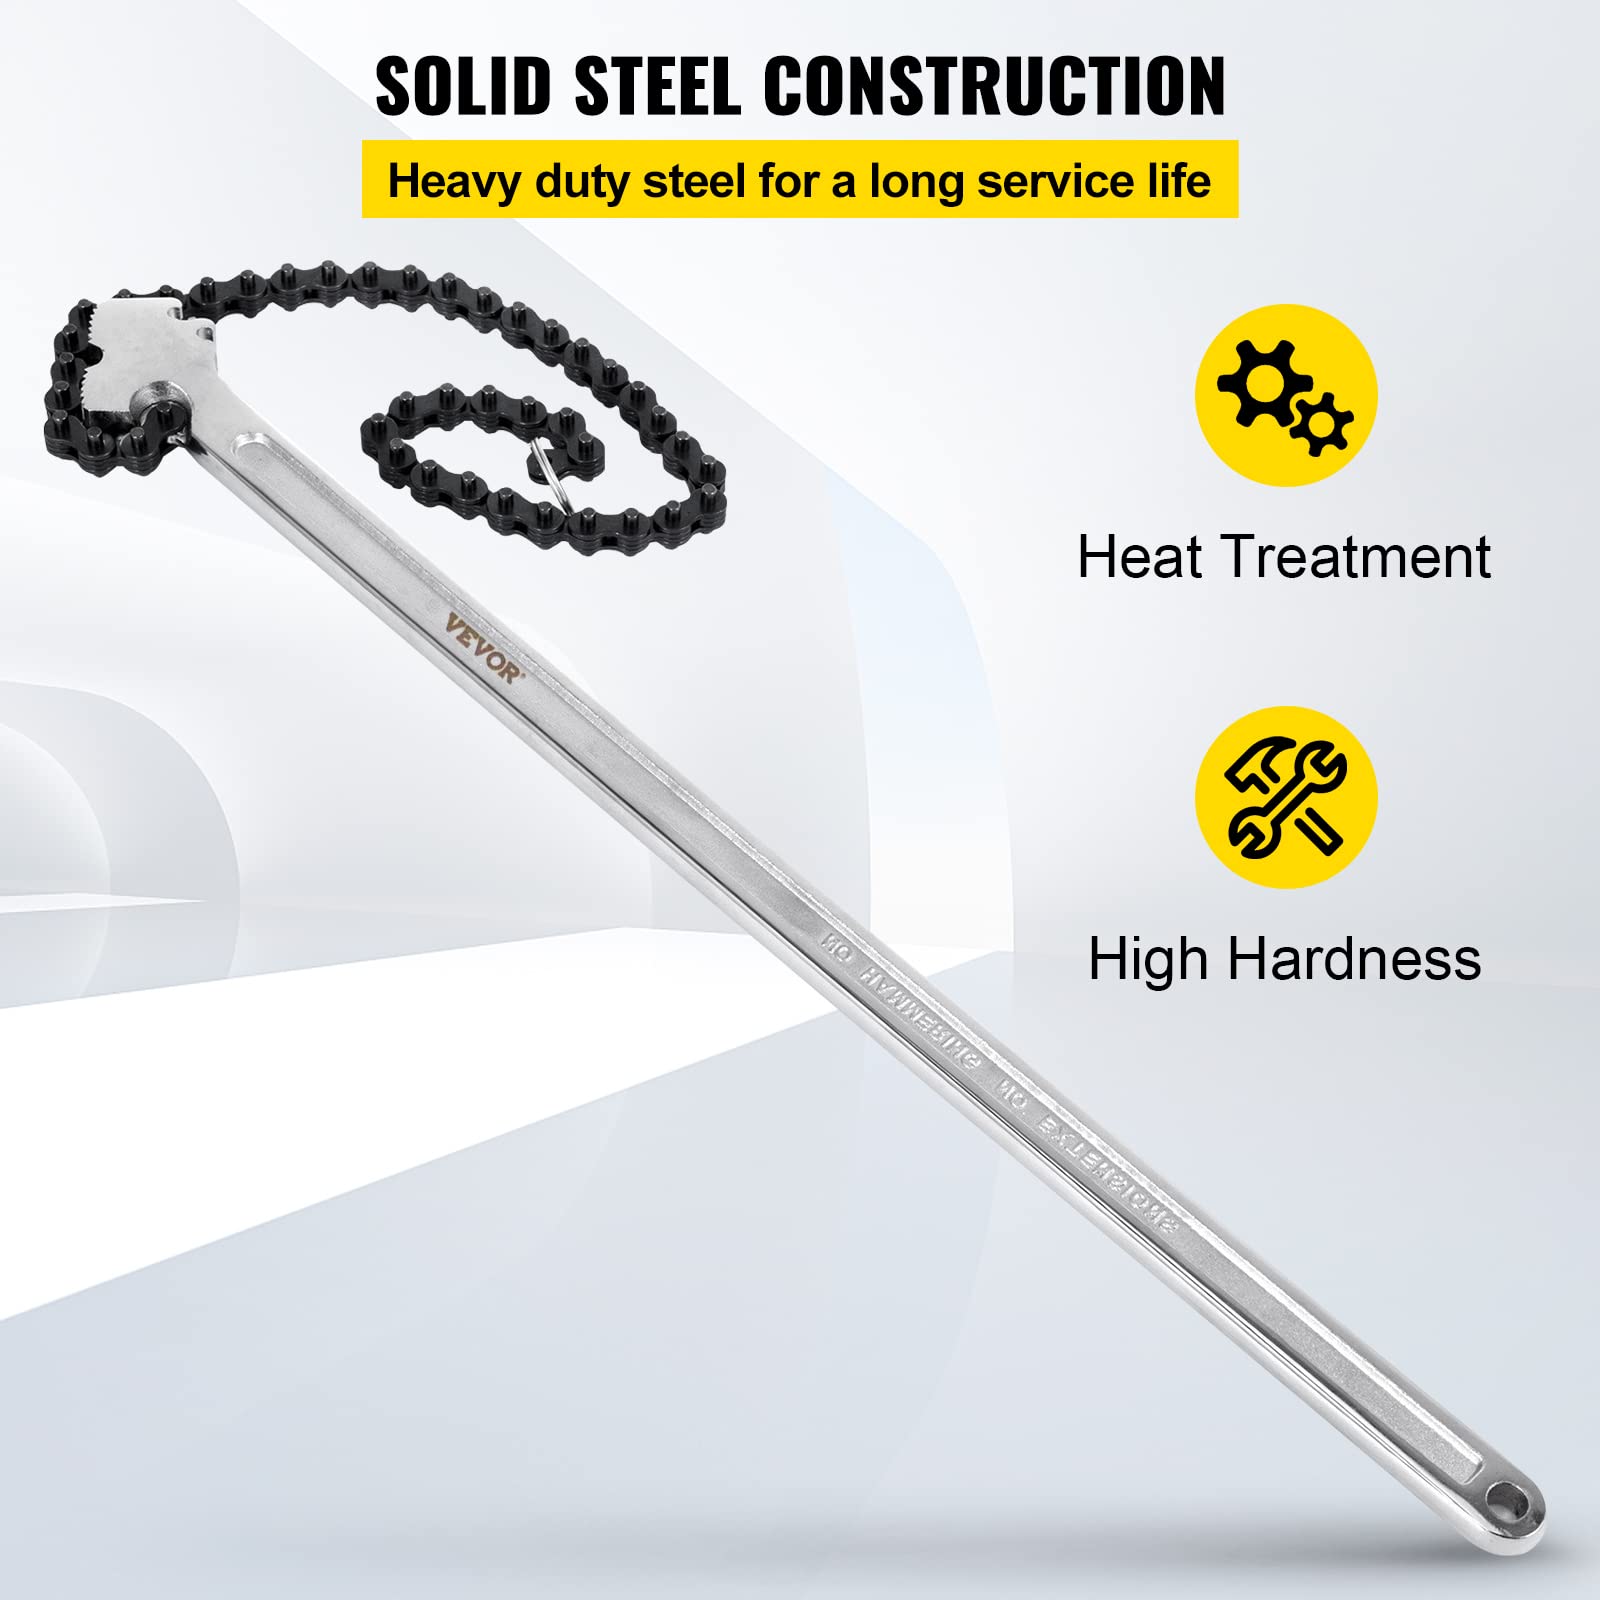 VEVOR Chain Wrench 24 inch, Carbon Steel Chain Pipe Wrench Heavy Duty 6.7inch Diameter Capacity Chain Strap Filter Wrench